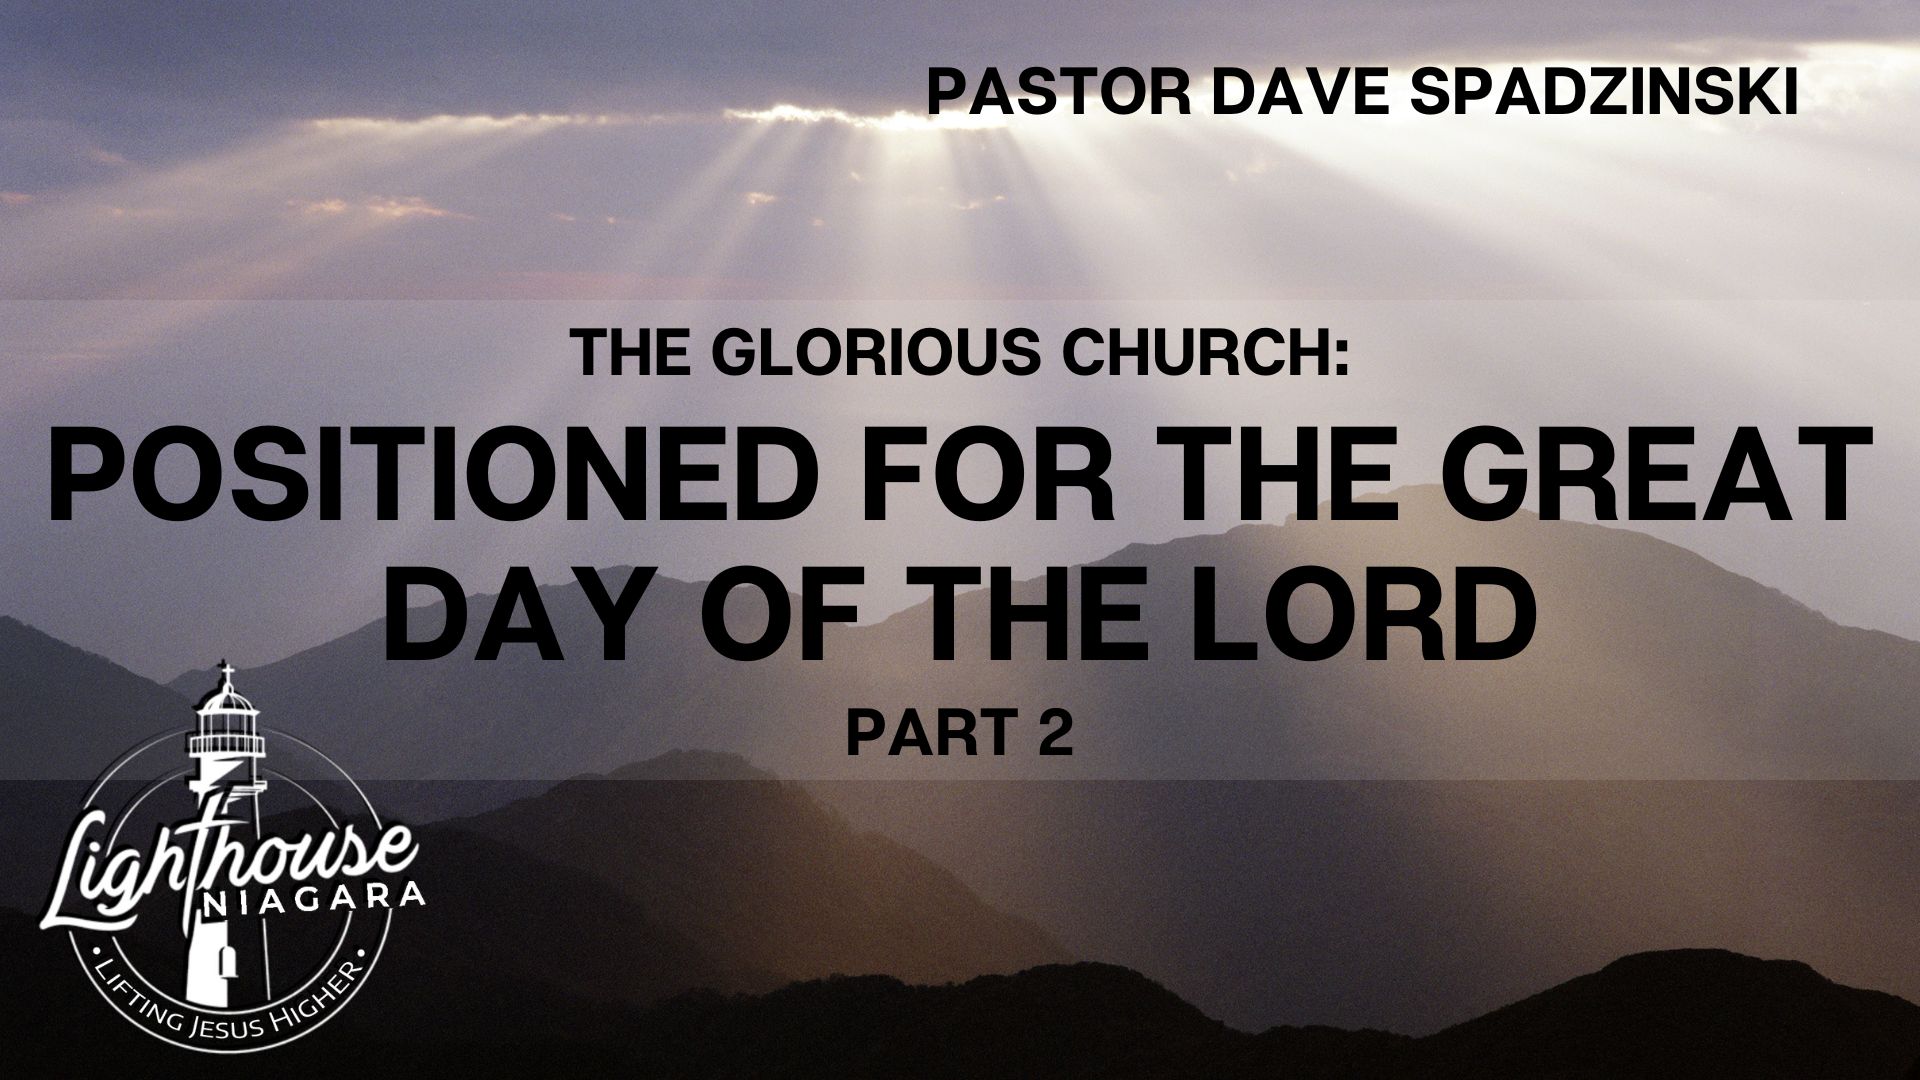 The Glorious Church: Positioned For The Great Day Of The Lord - Pastor Dave Spadzinski